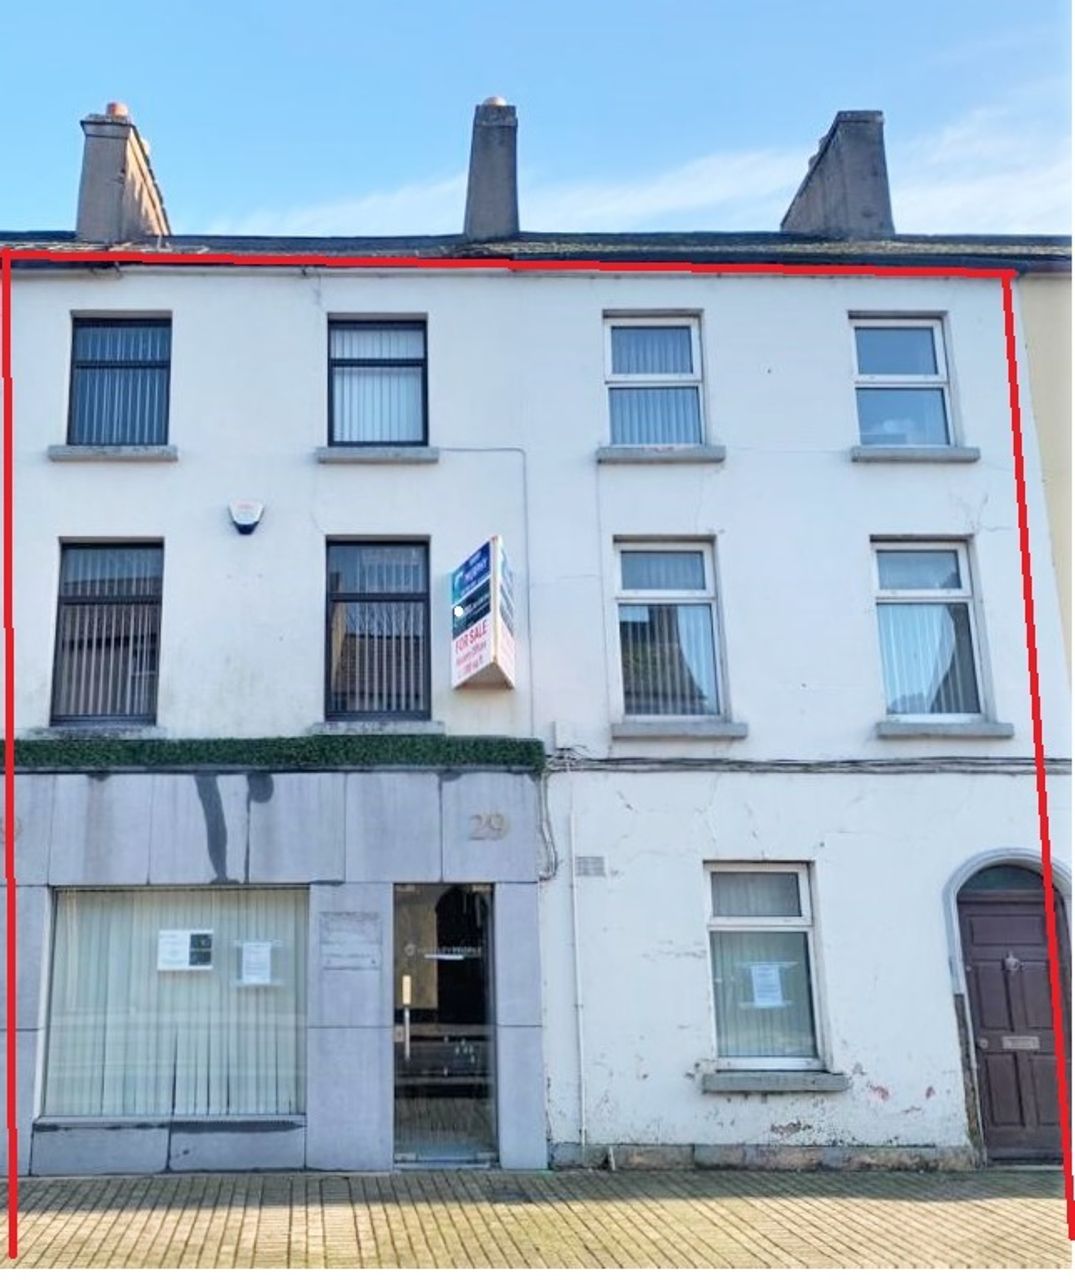 29 Manor Street, Waterford City, Co. Waterford